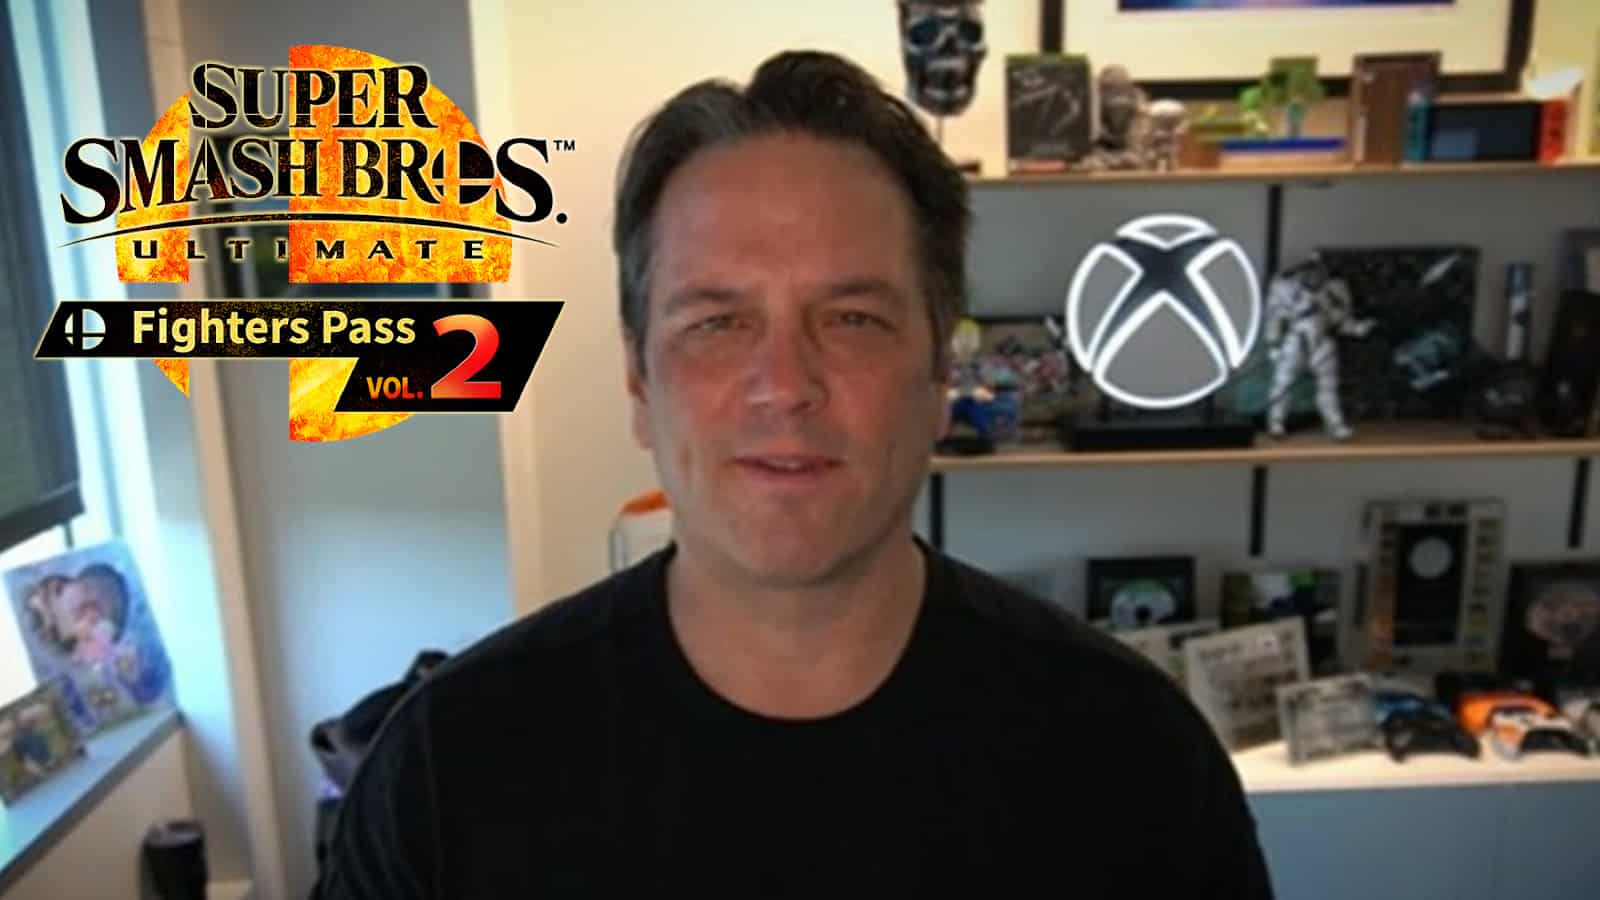 Phil Spencer explains the Nintendo Switch on his shelf and smash ultimate dlc